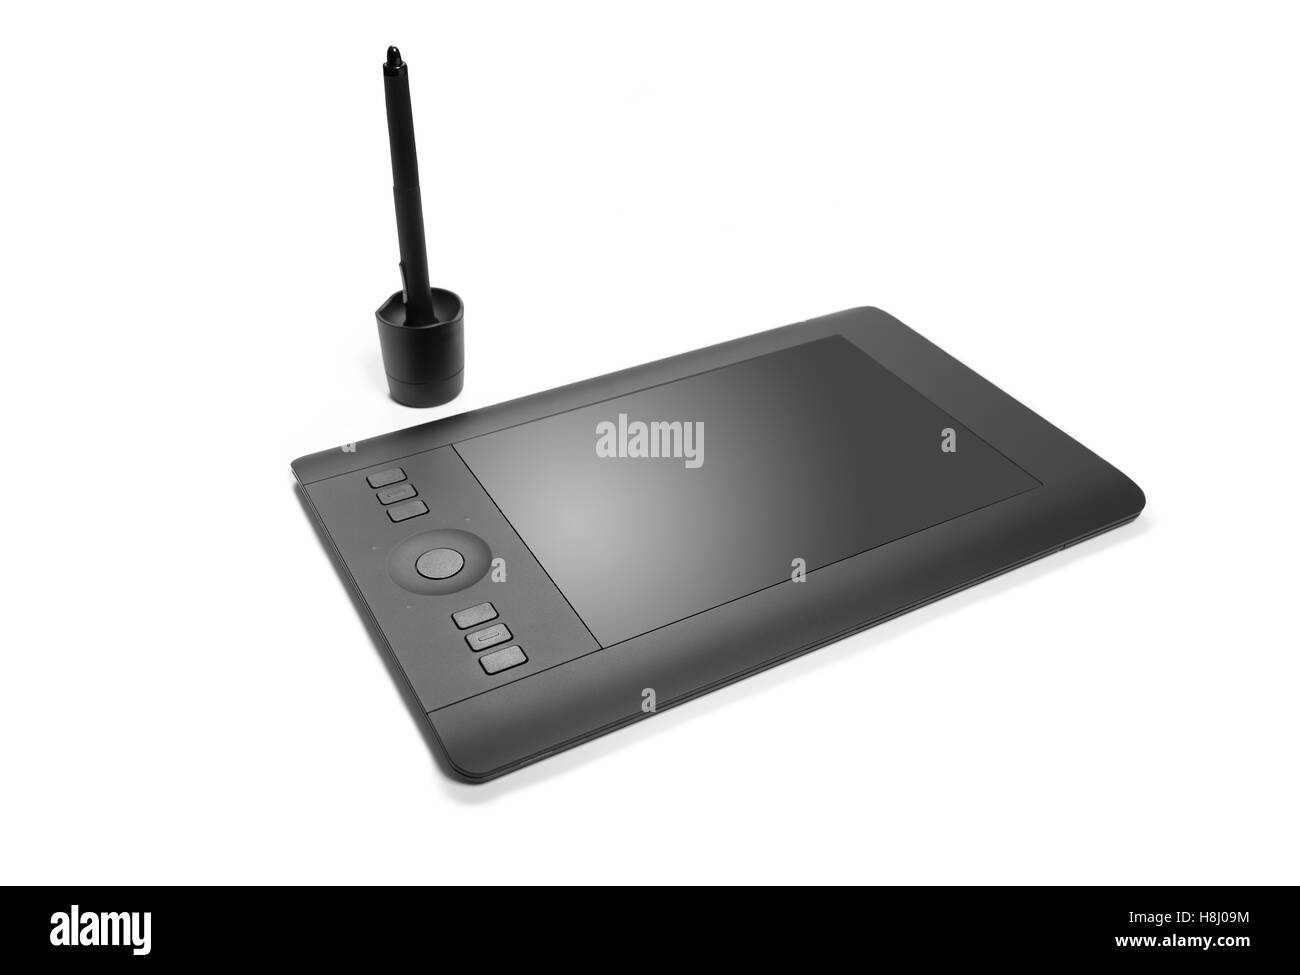 Sketch tablet Black and White Stock Photos & Images - Alamy